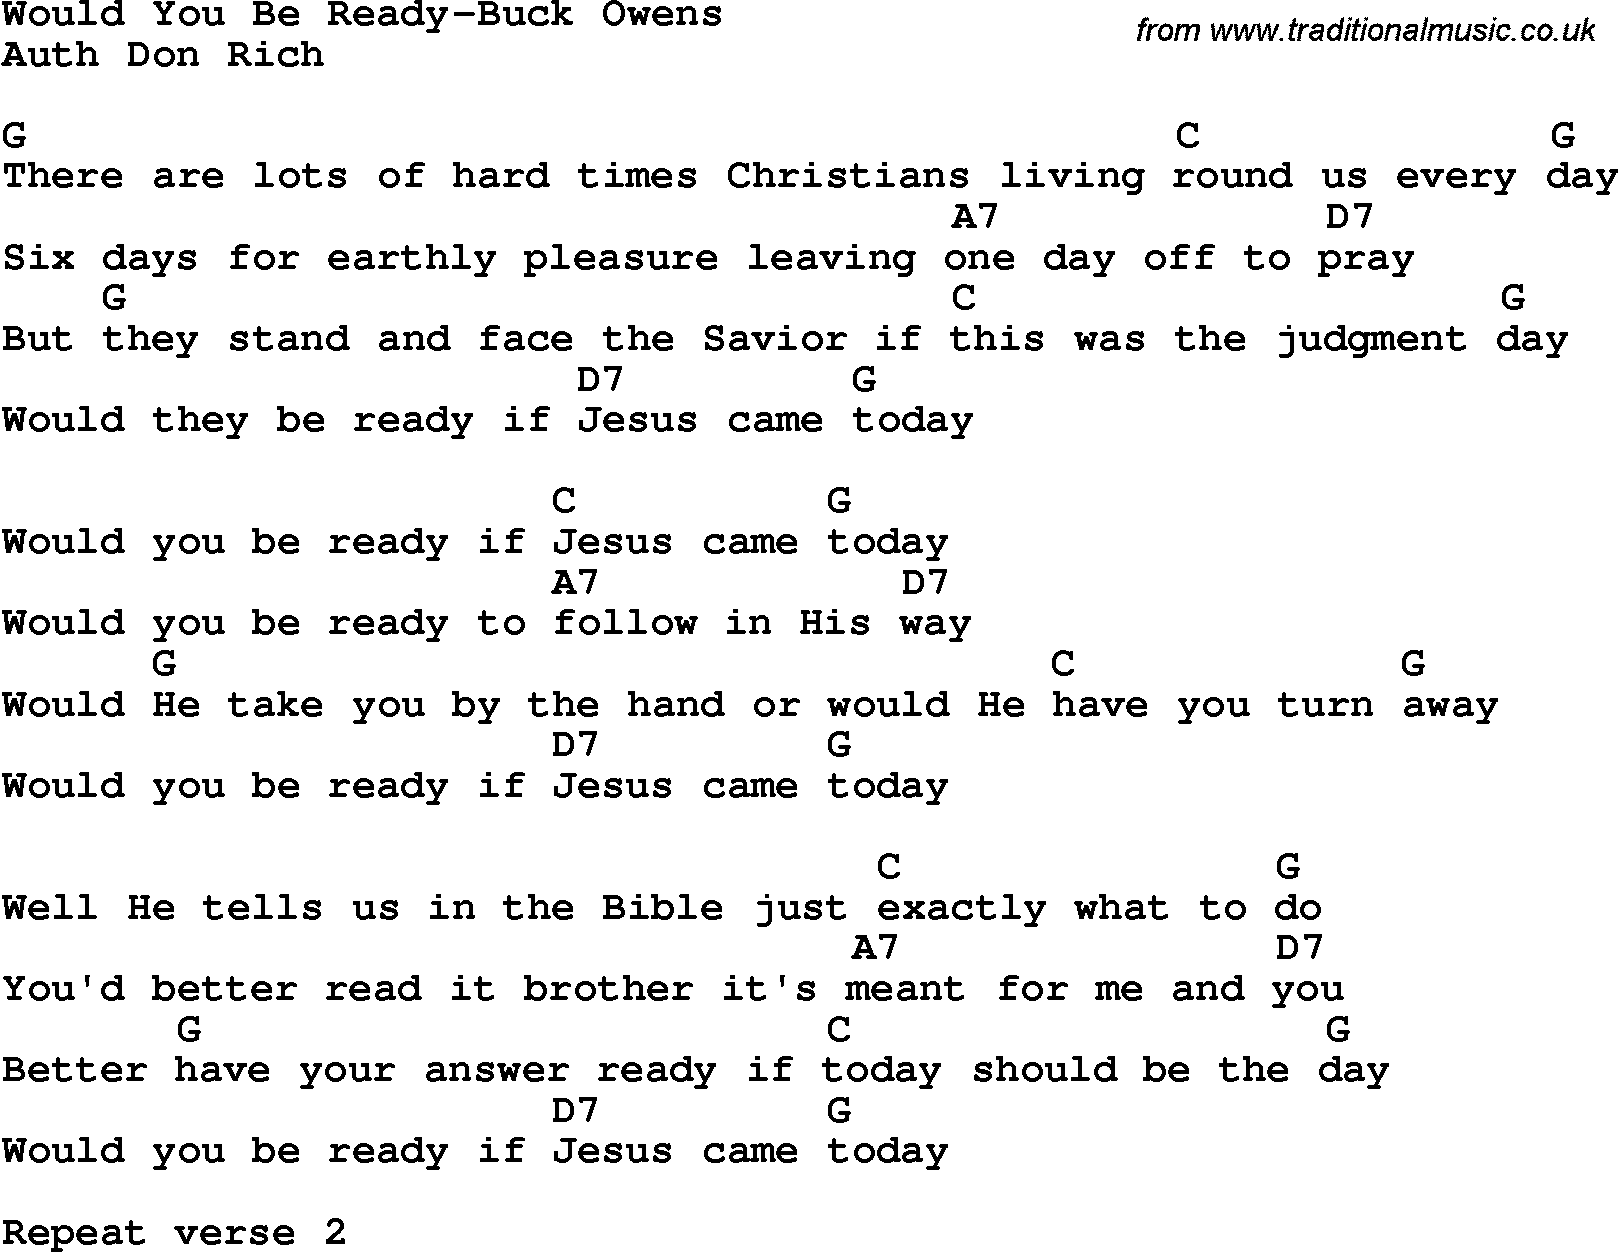 Country, Southern and Bluegrass Gospel Song Would You Be Ready-Buck Owens lyrics and chords